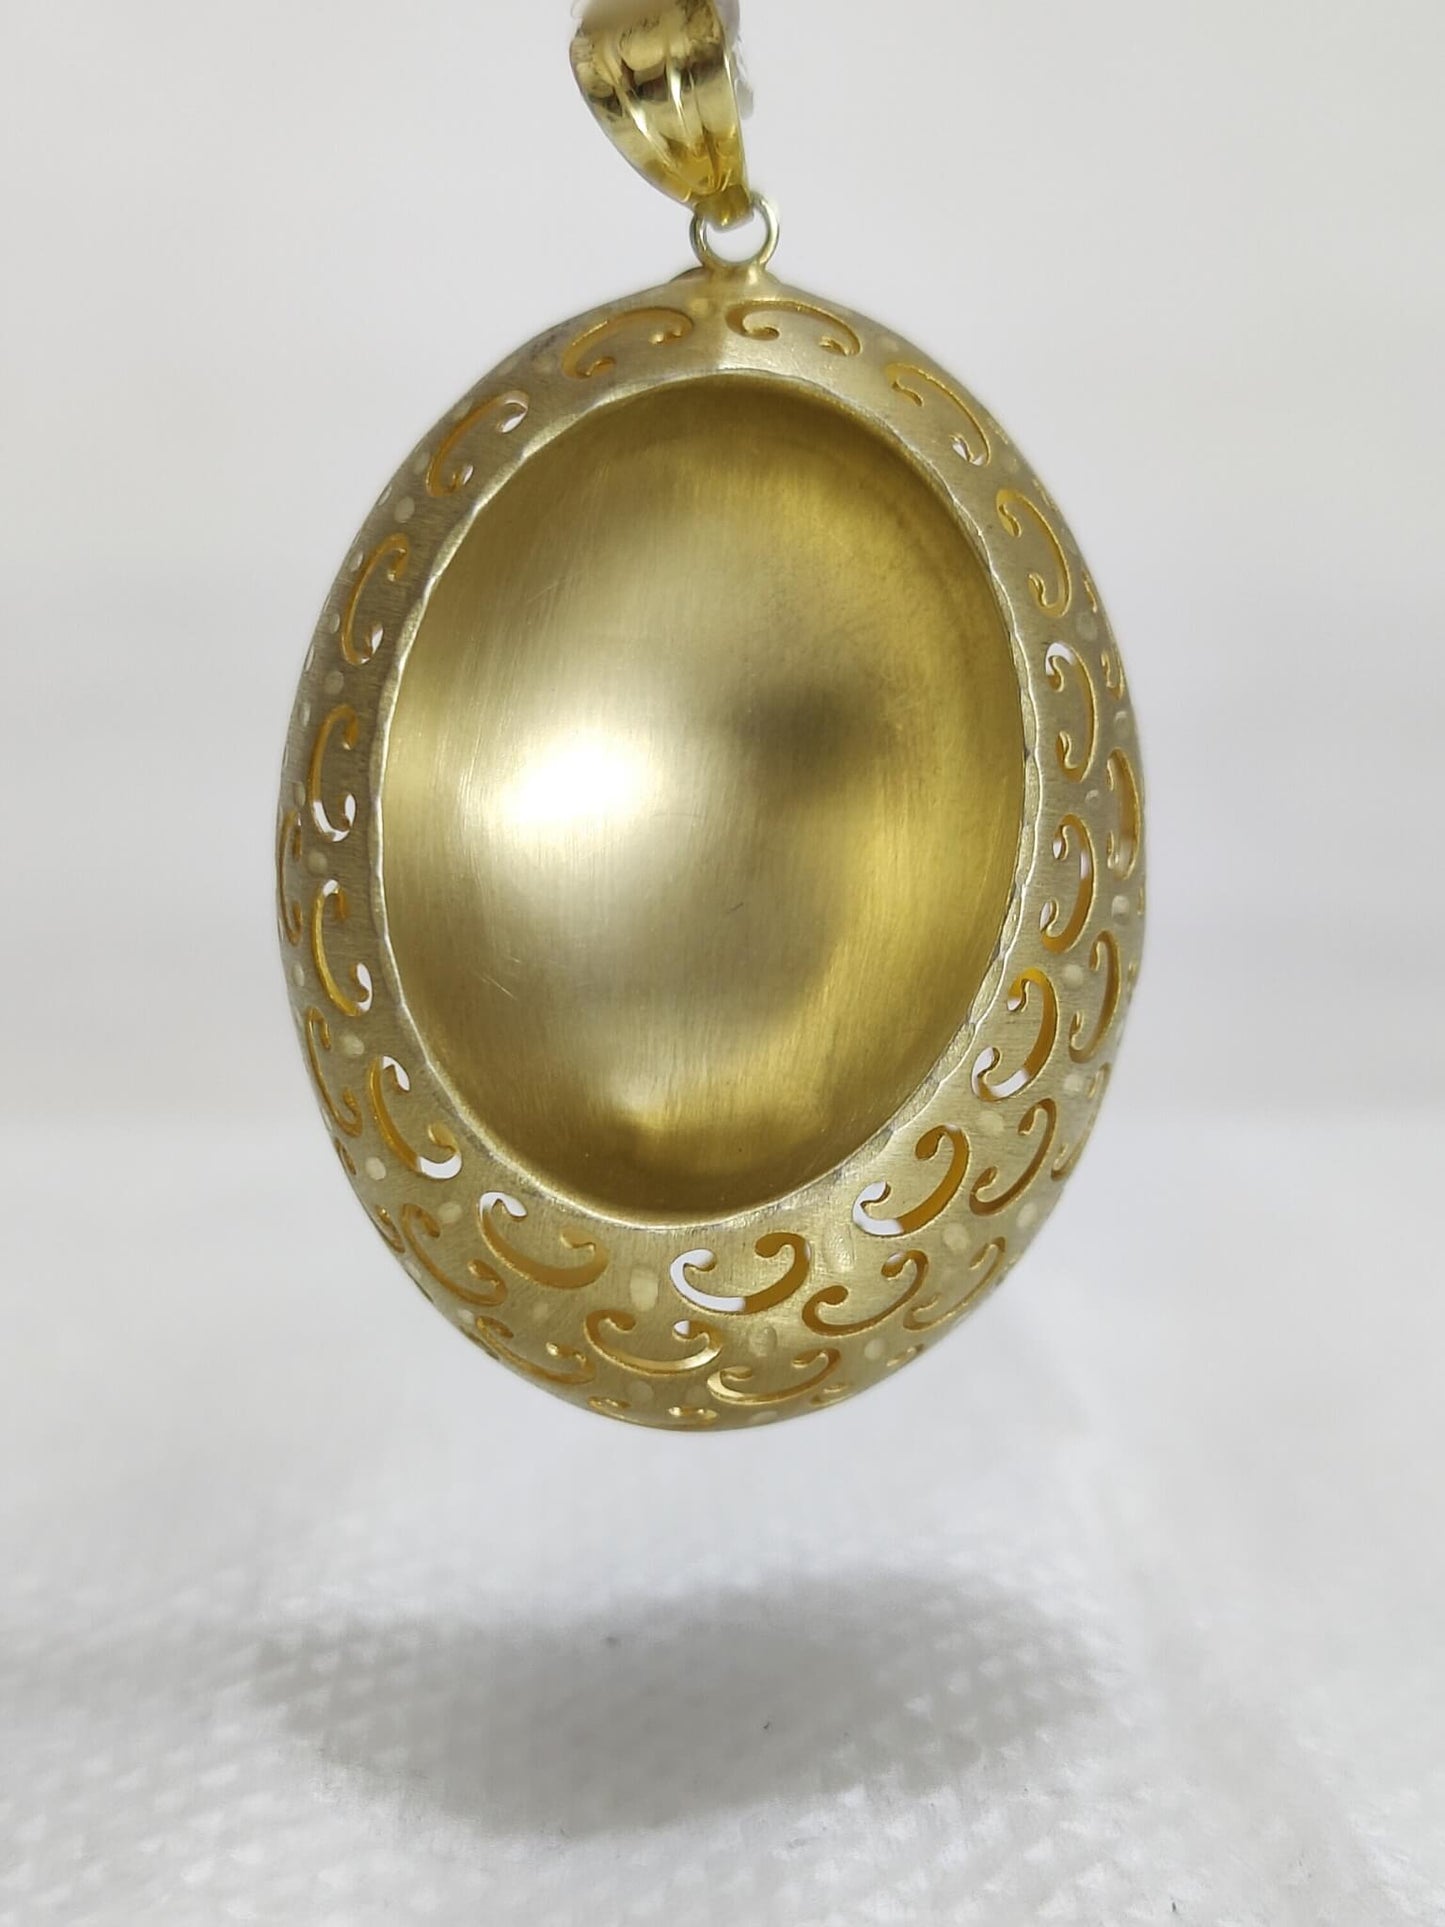 Oval Shaped Antique Silver Pendant